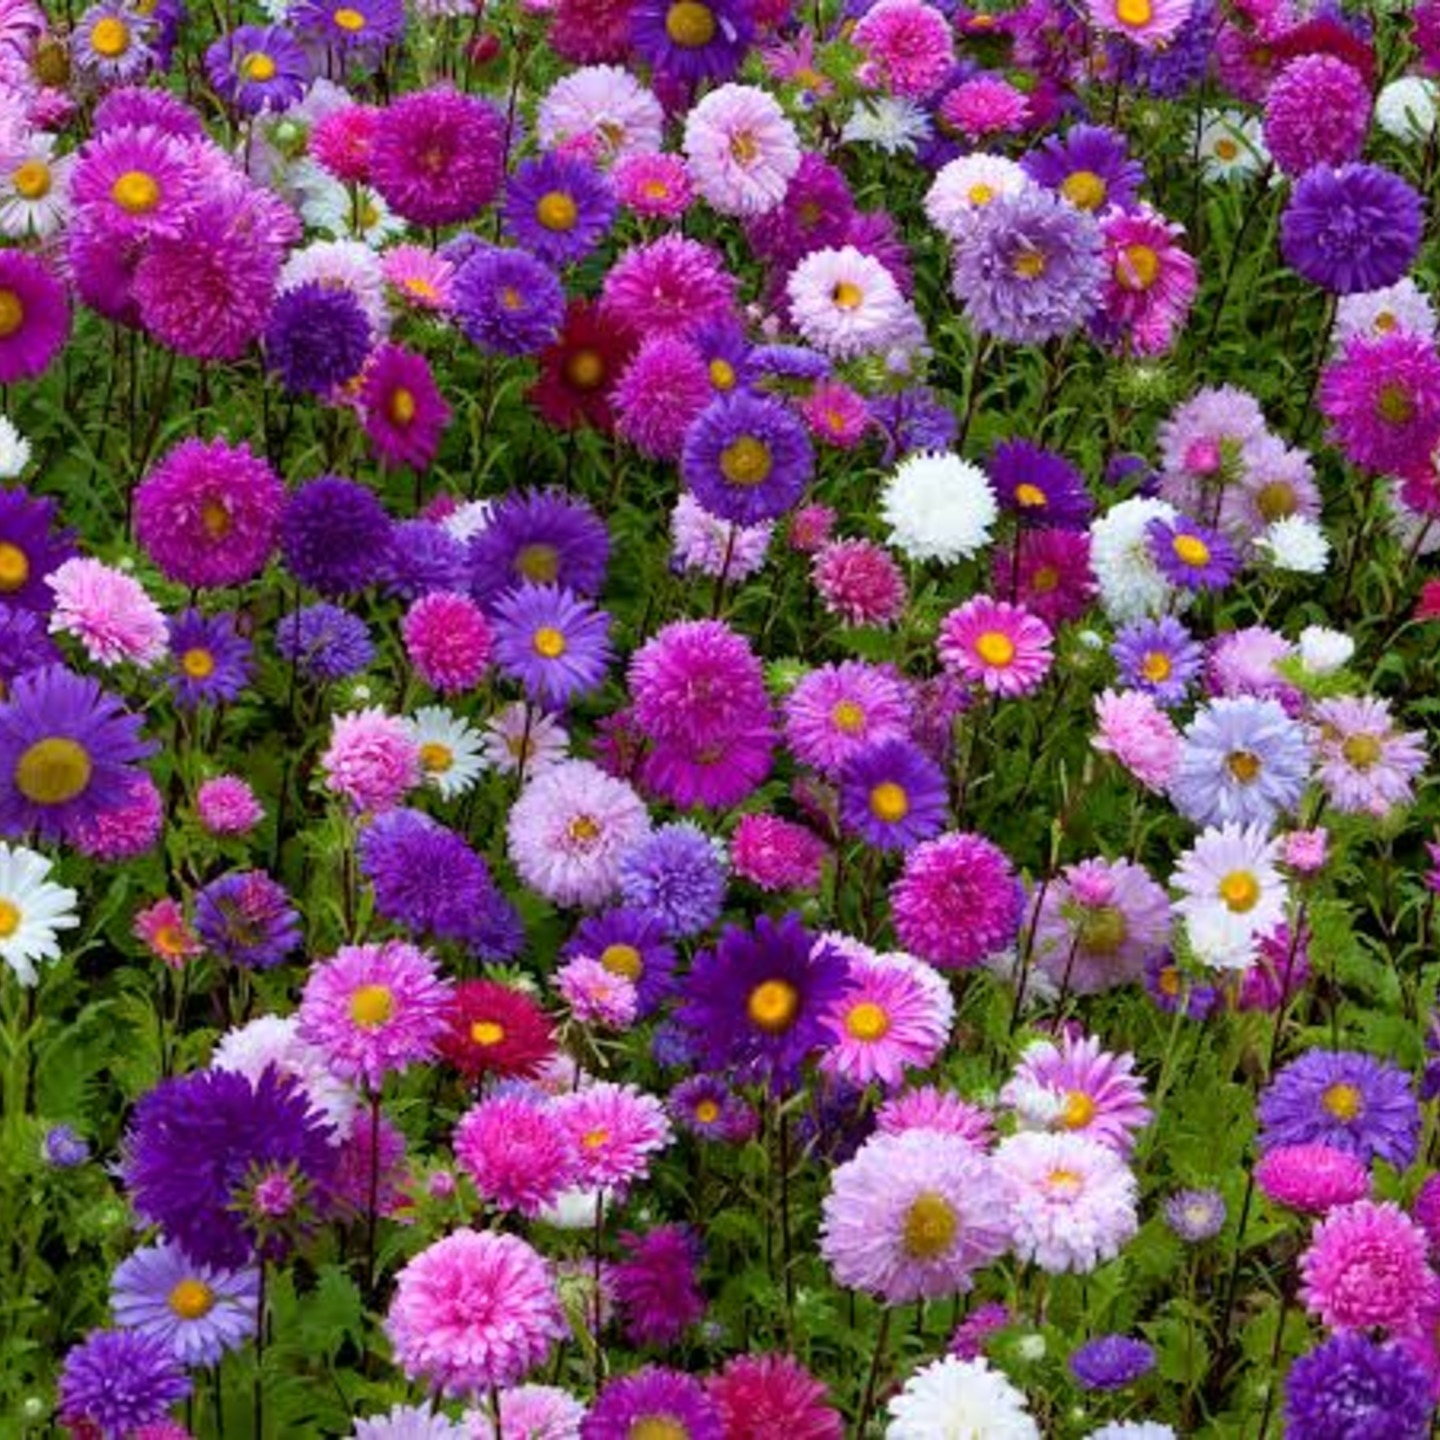 MyHobbyGarden MHG-FLWR-Aster Mixed Colors -20 Seeds